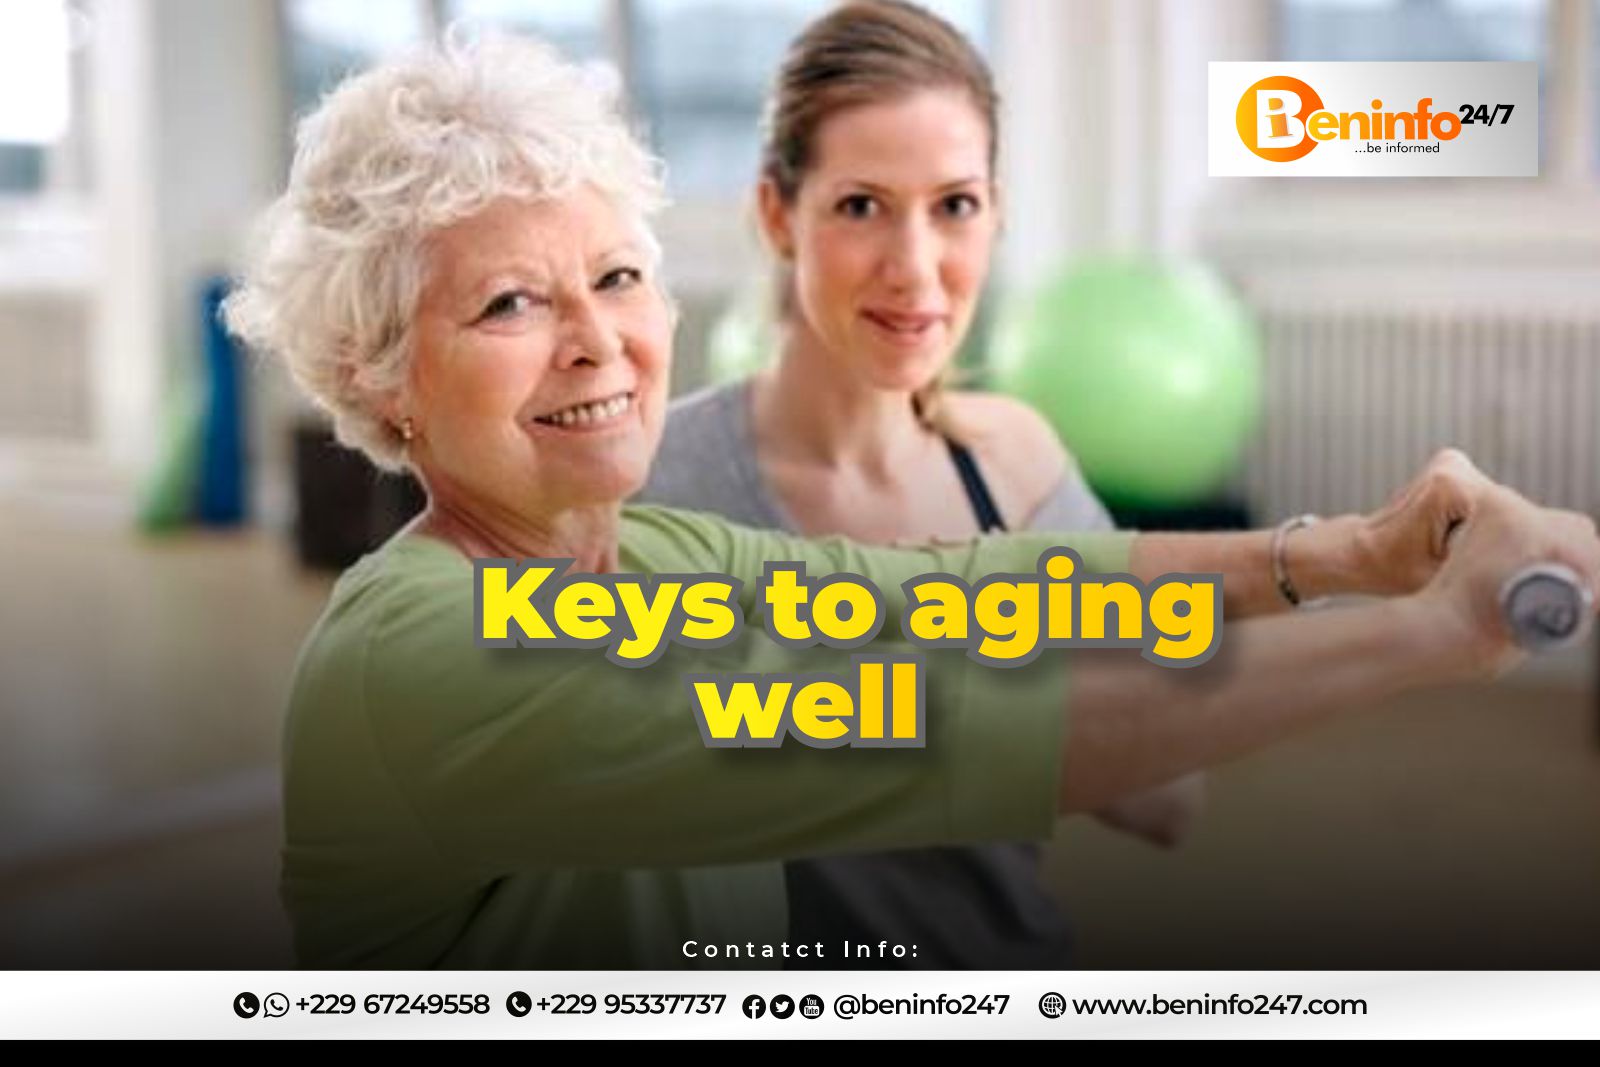 Keys to aging well